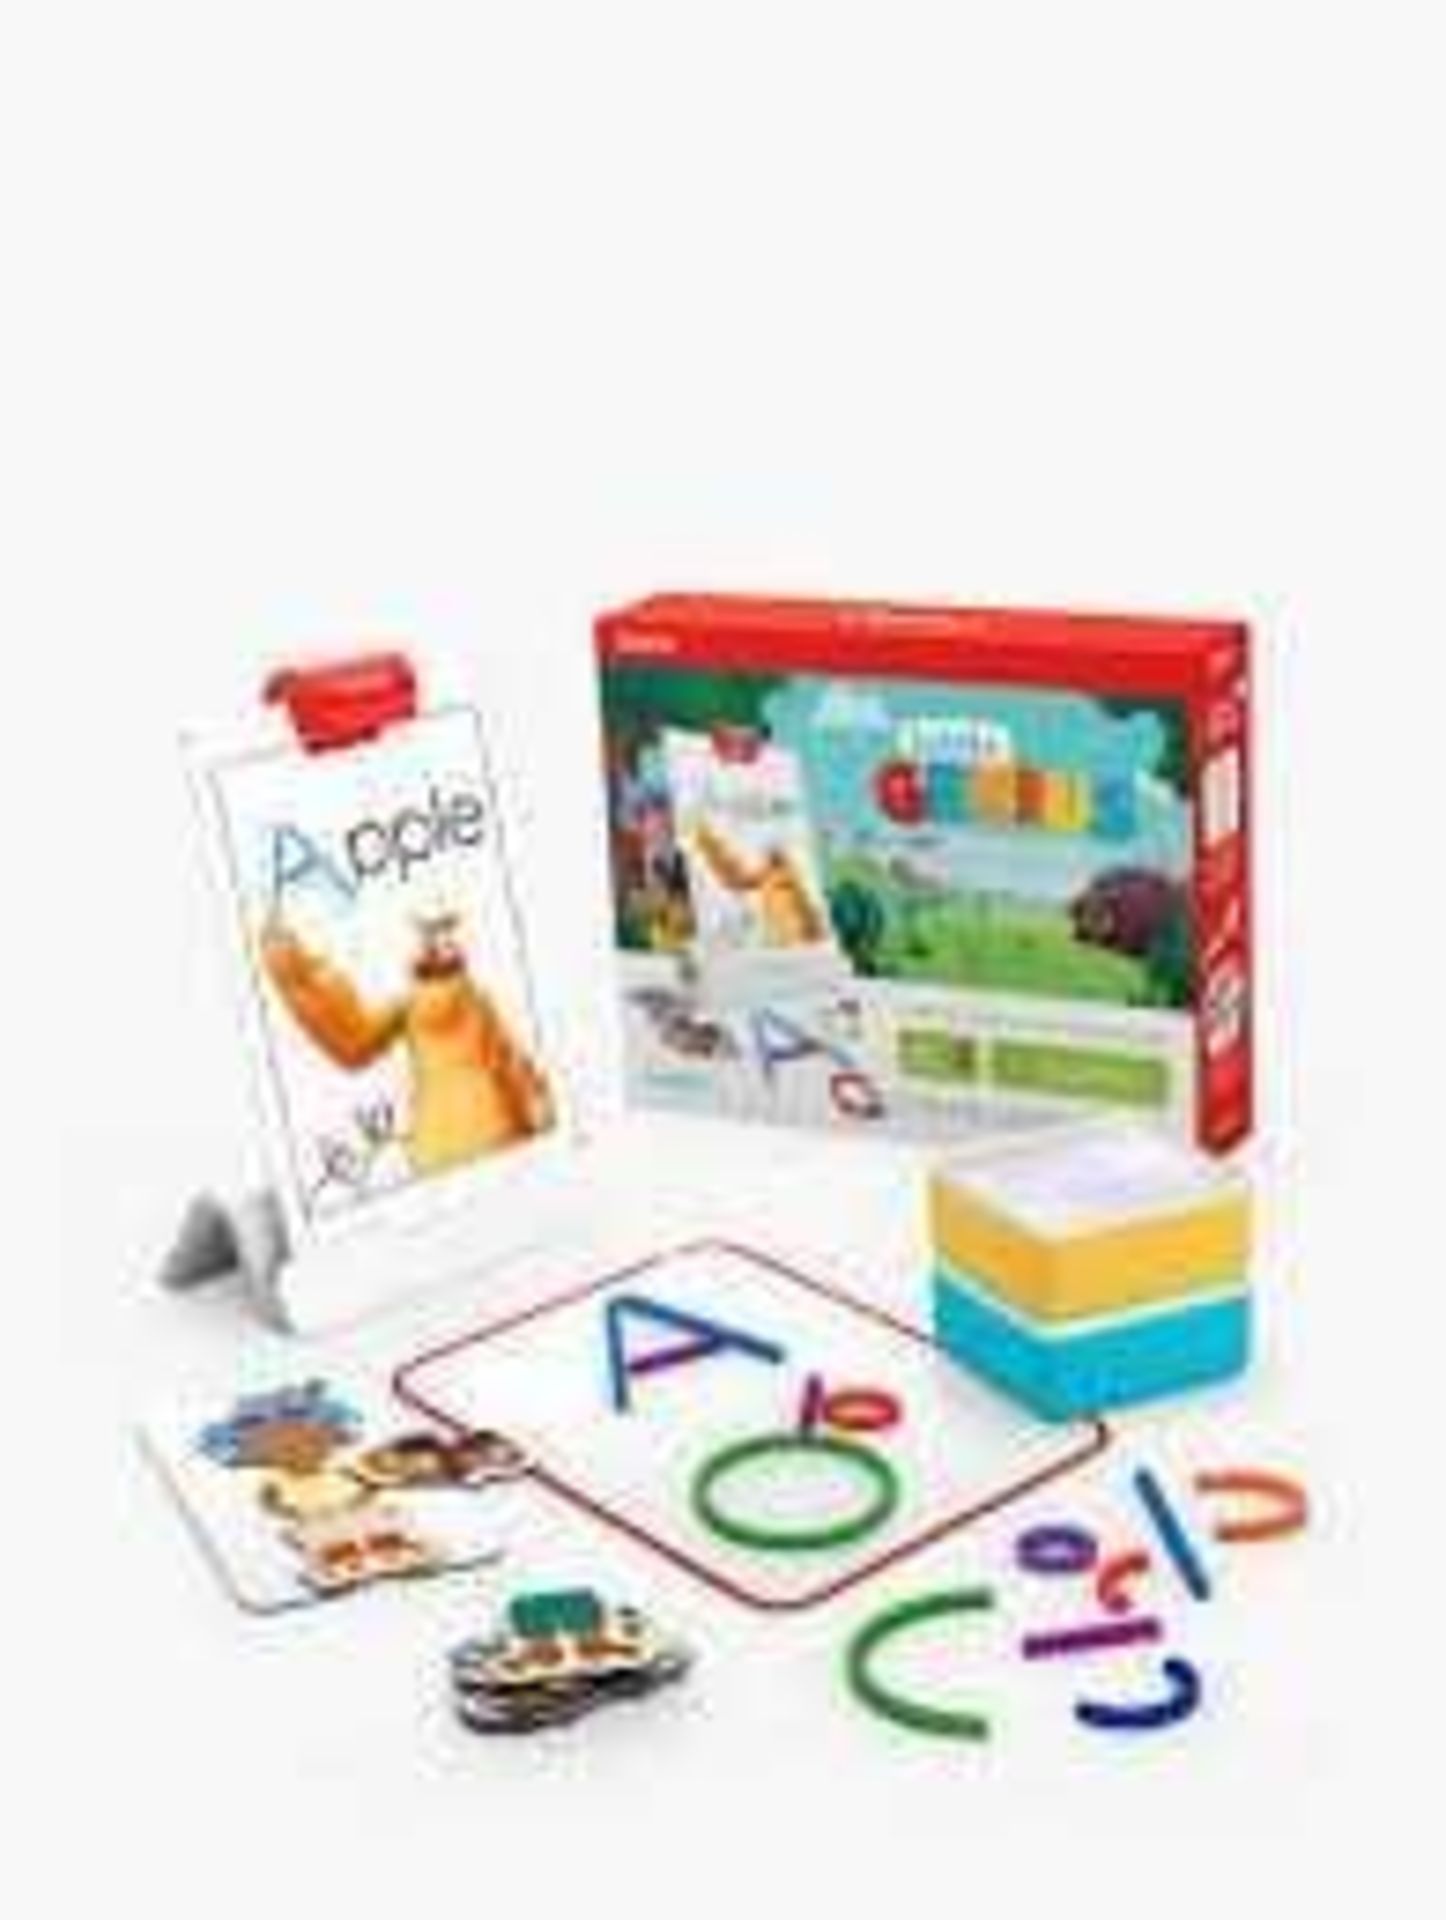 RRP £180 Lot To Contain 2 Boxed Osmo Little Genius Starter Kits